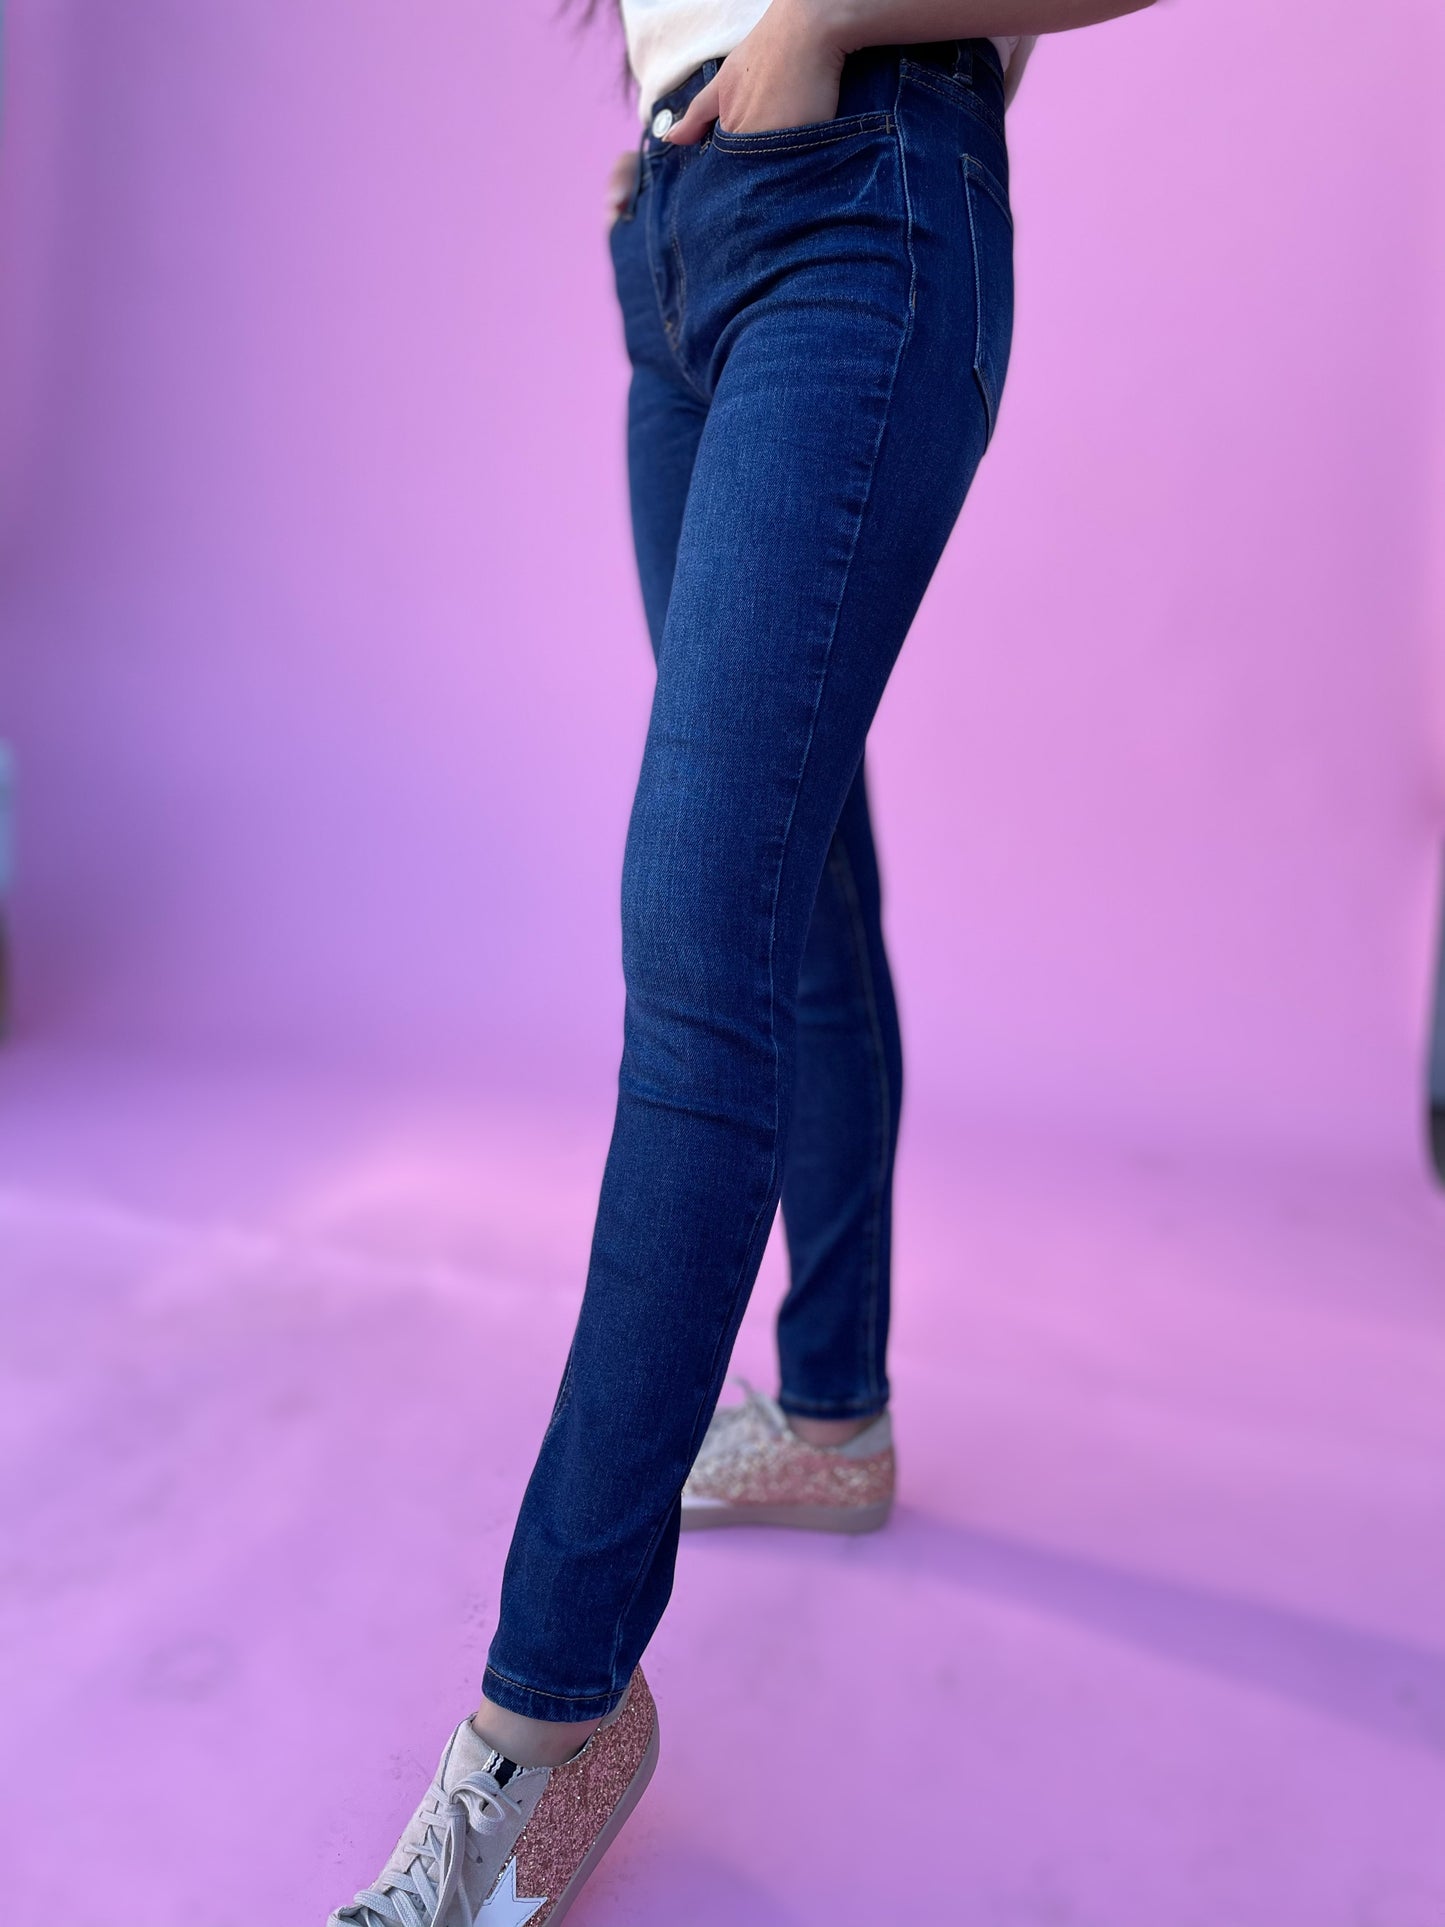 Dark Wash Non Distressed High Rise Skinny Jeans*FINAL SALE*